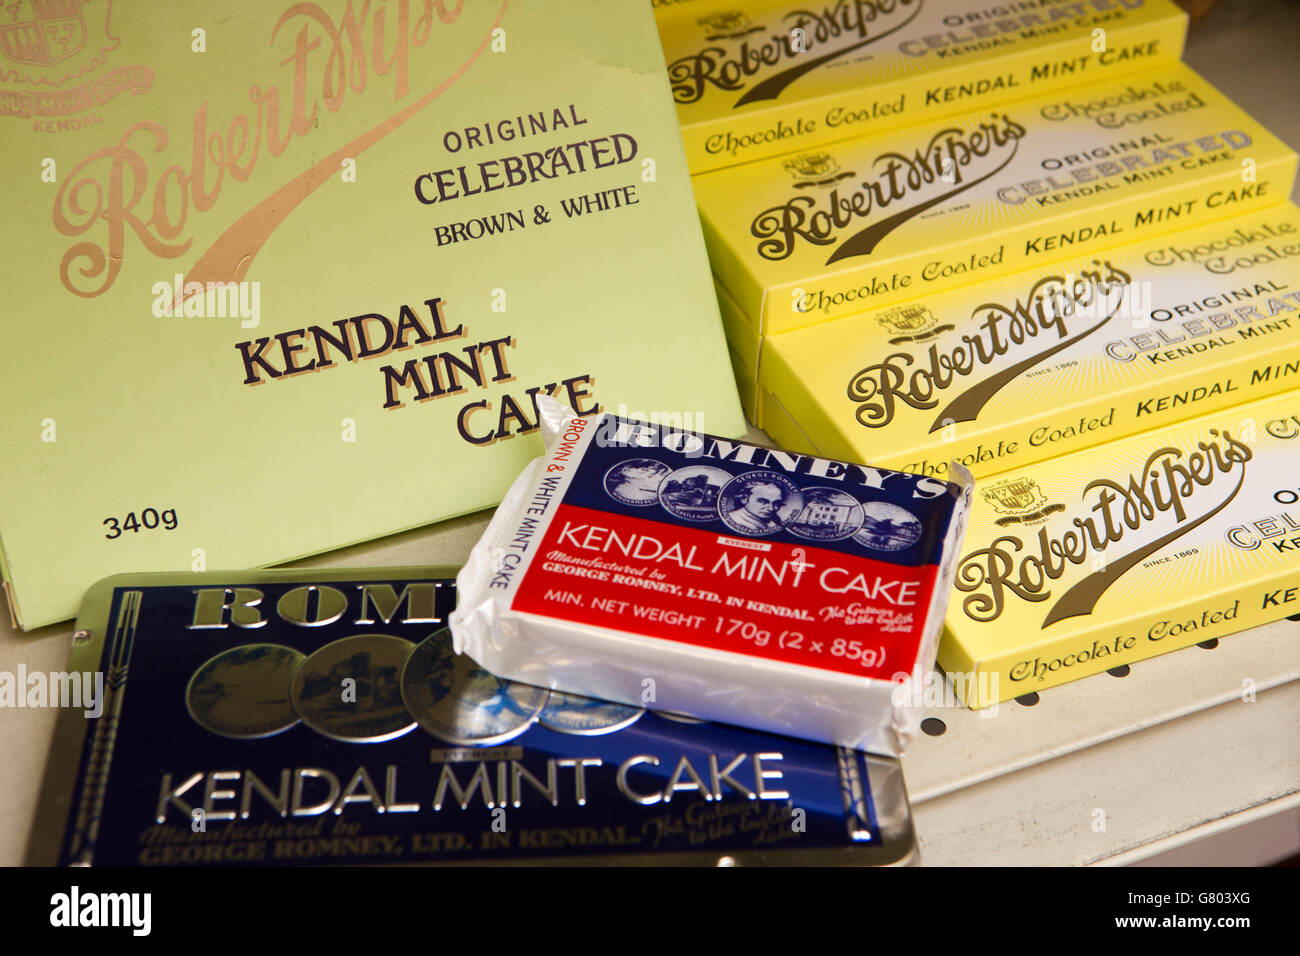 UK, Cumbria, Kendal, Robert Wipers and Romney’s Kendal Mint Cake Stock Photo